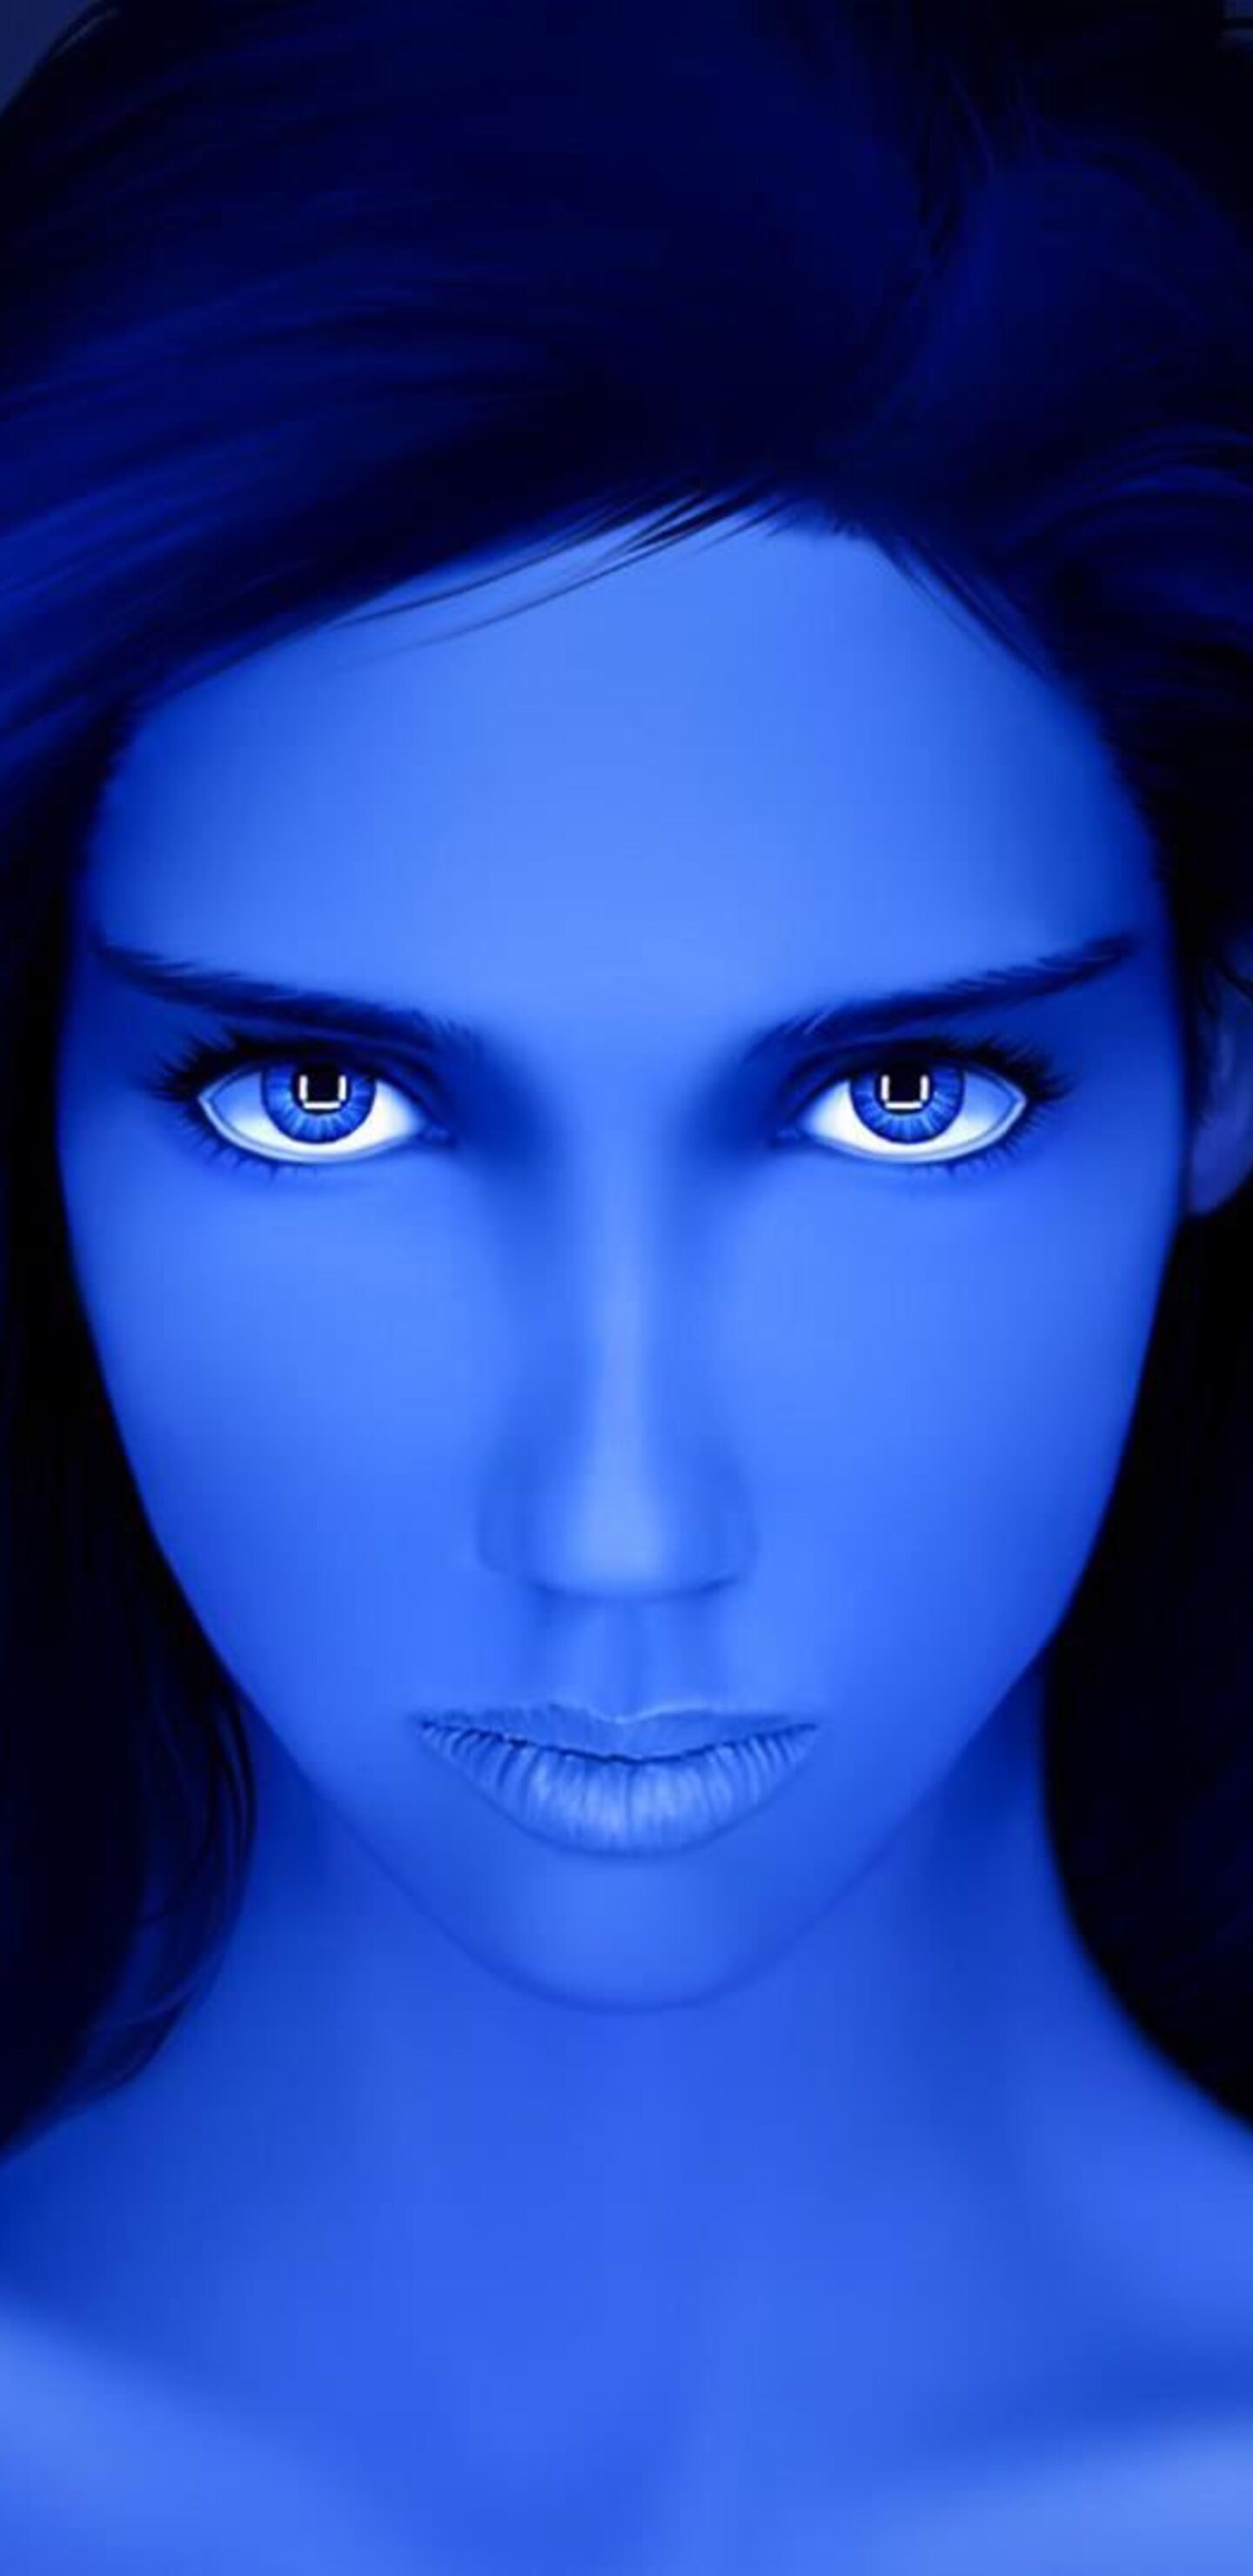 1440x2960 Artistic Blue Girl Samsung Galaxy Note 9,8, S9,S8,S8+ QHD HD 4k Wallpapers, Images ...